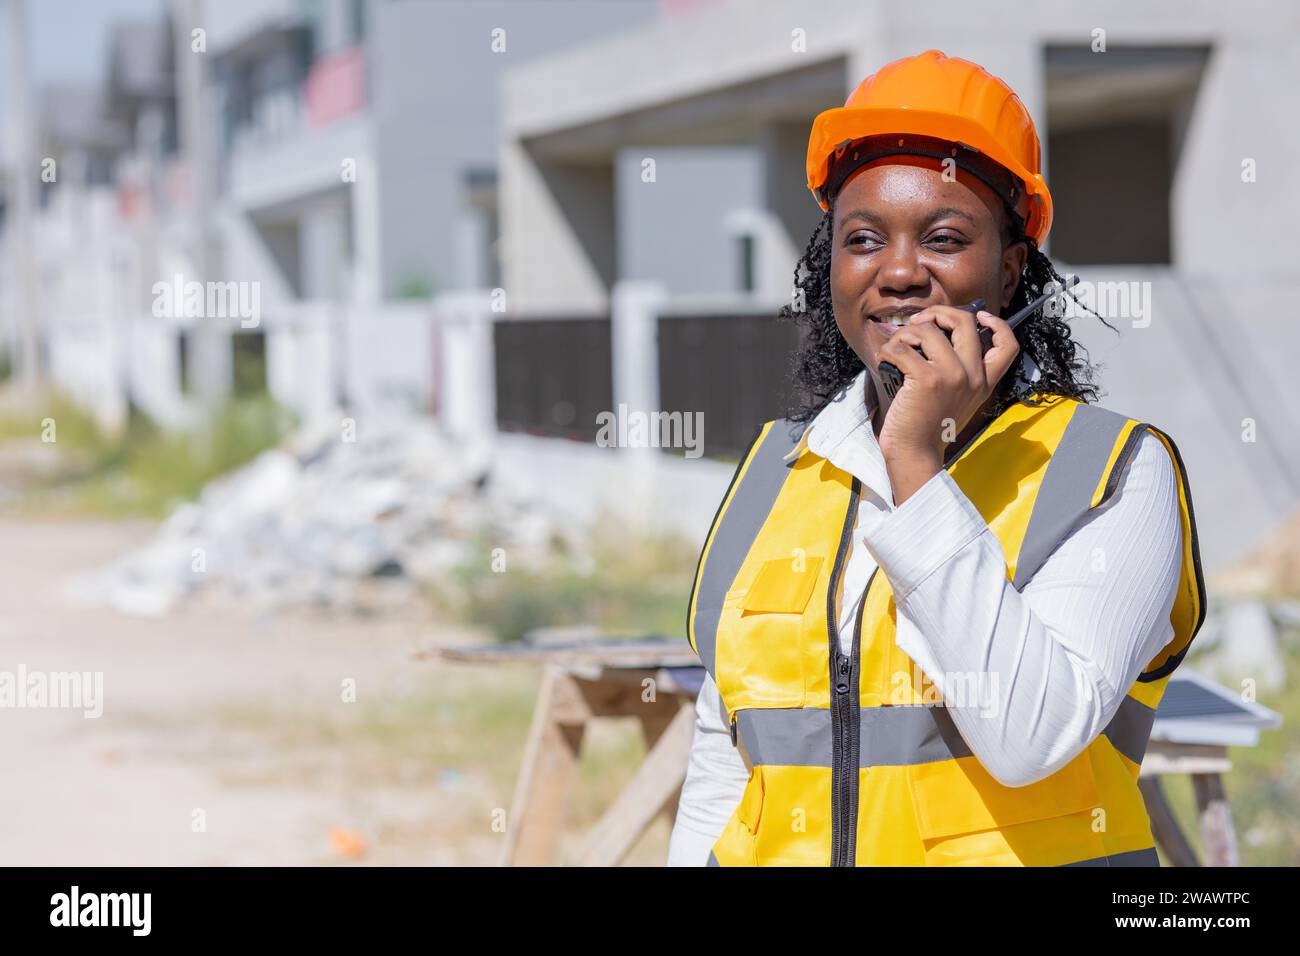 Smart women worker, Professional construction engineer builder foreman contractor work control operate construction site in project manager position. Stock Photo